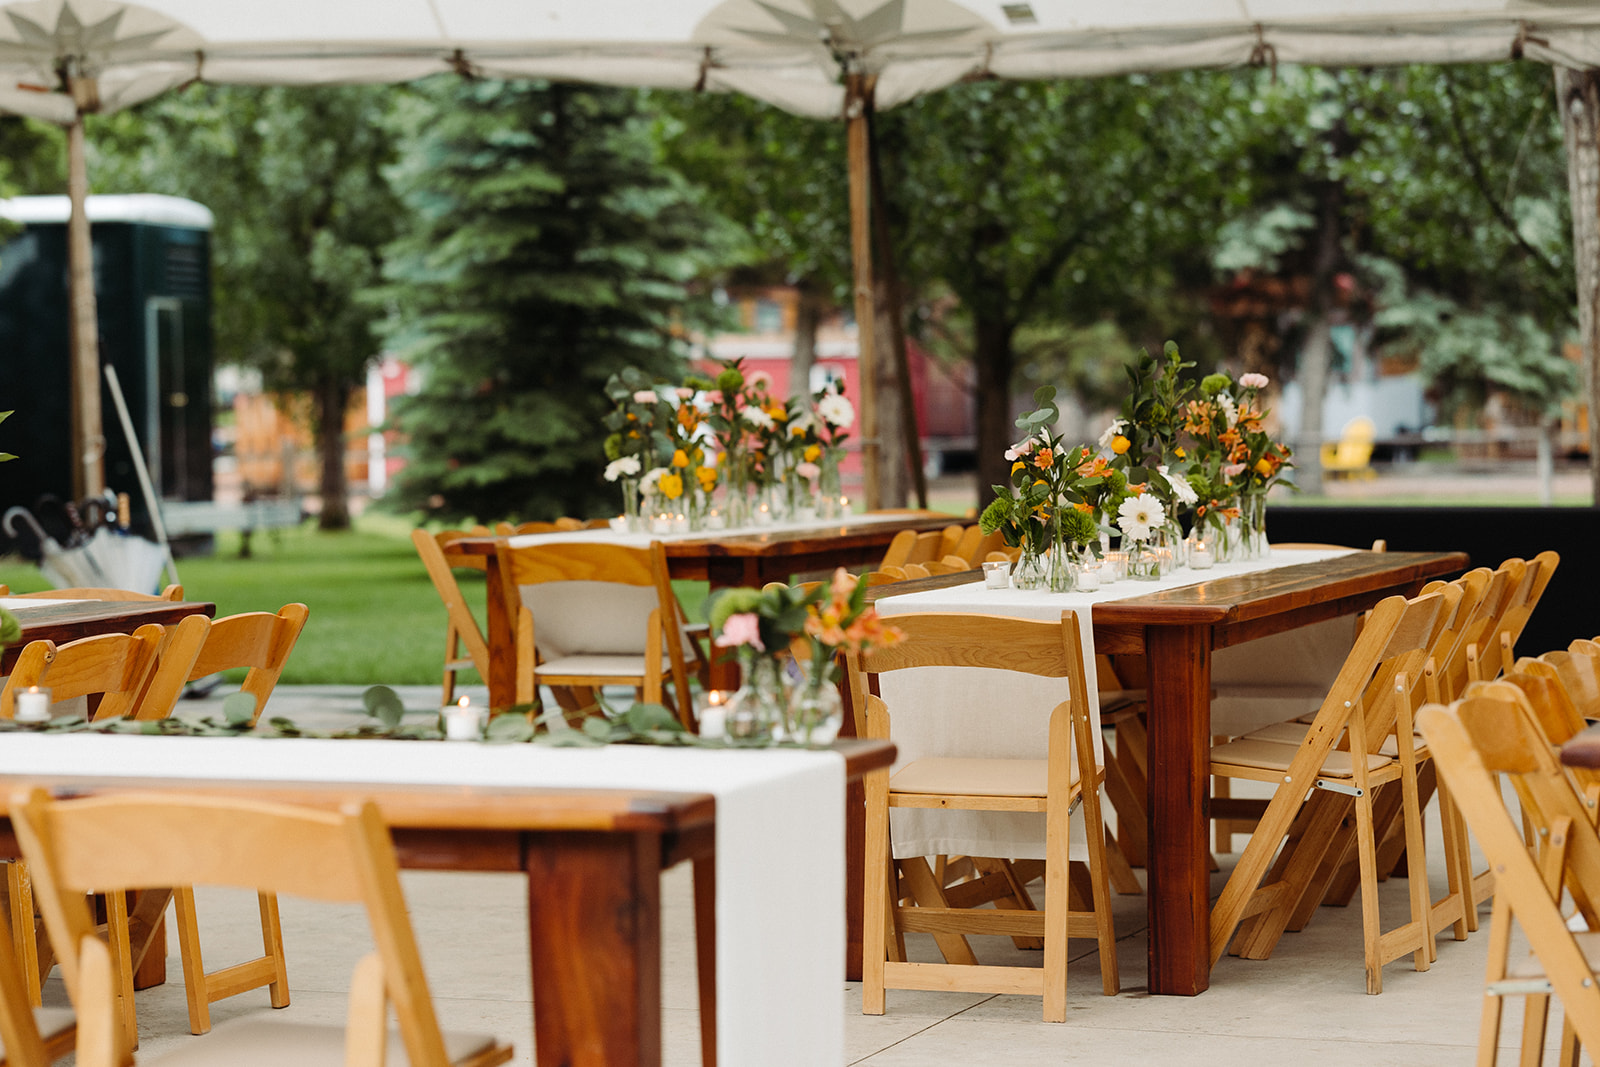 The tented reception at River Bend, complete with wooden tables that are decorated with bright orange and white flowers.